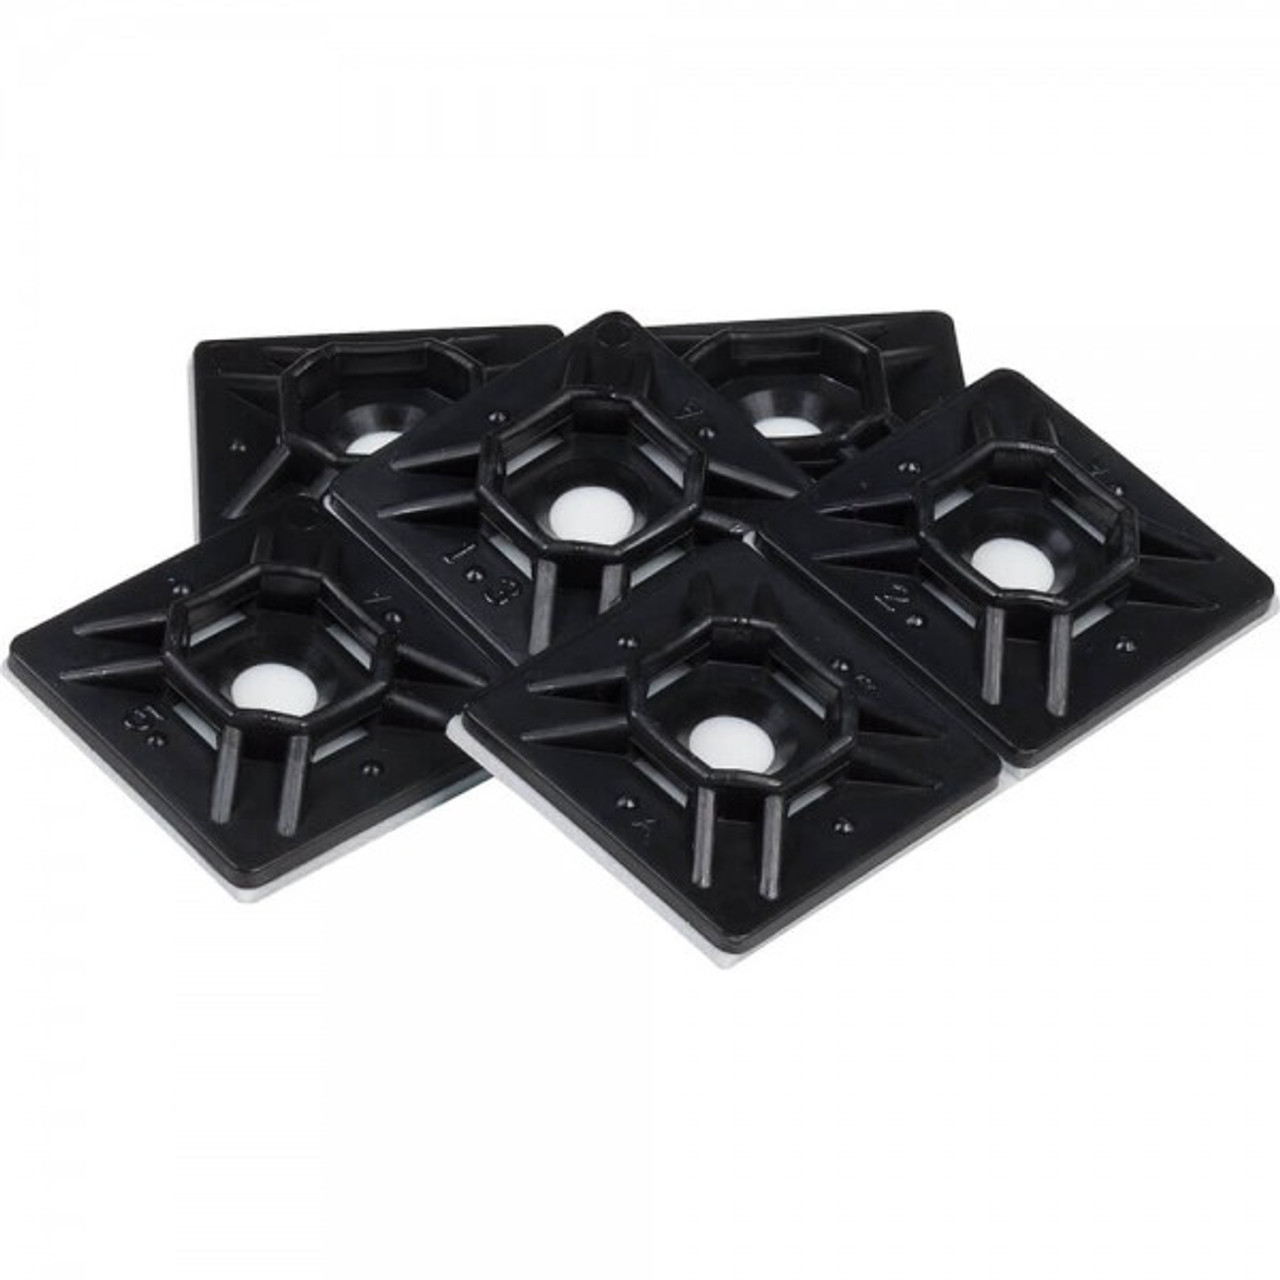 Cable Tie Mounting Bases Double Screw @ 50 Pack - Black  83-6033